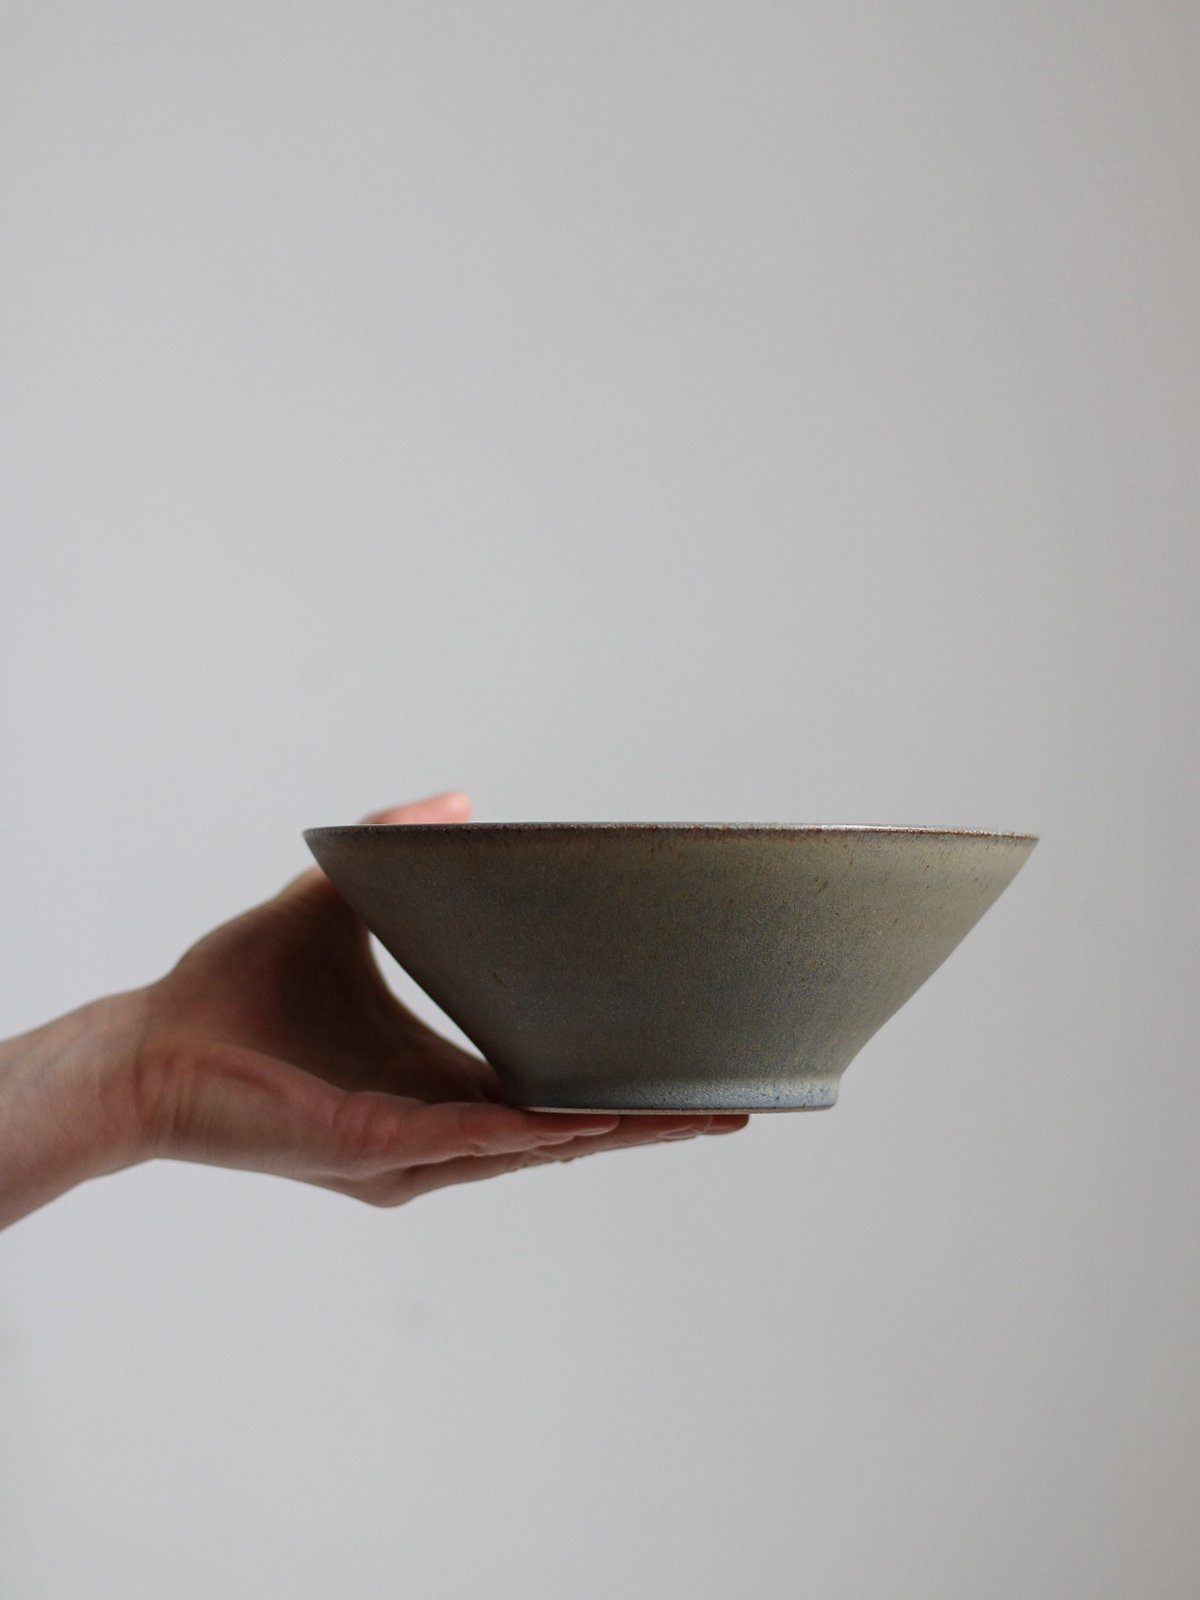 Image of serving bowl in loch